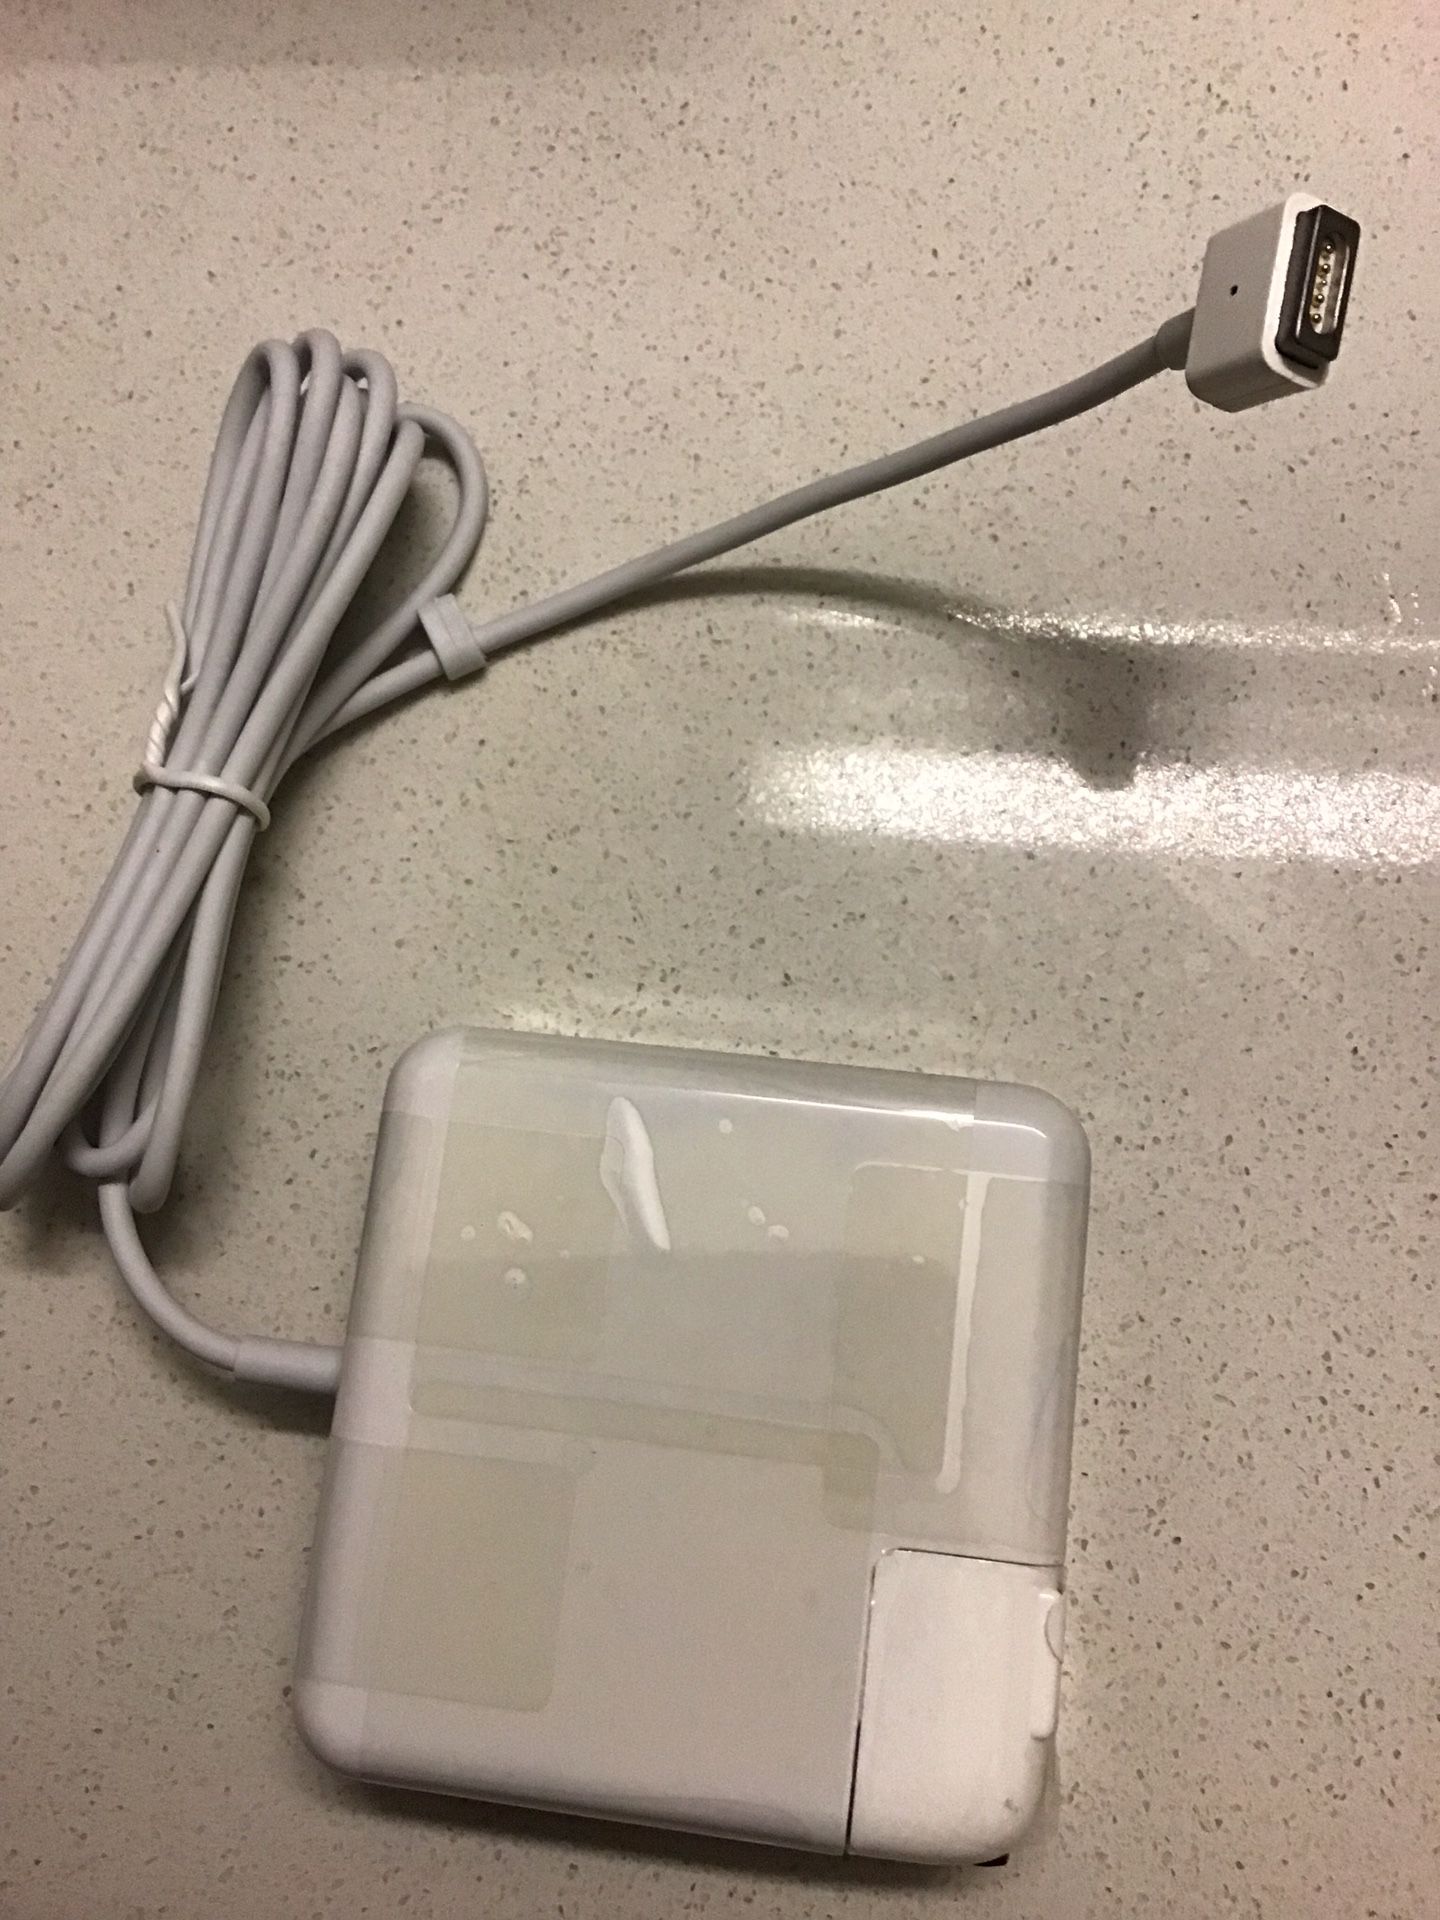 NEW! MacBook Pro charger 60W